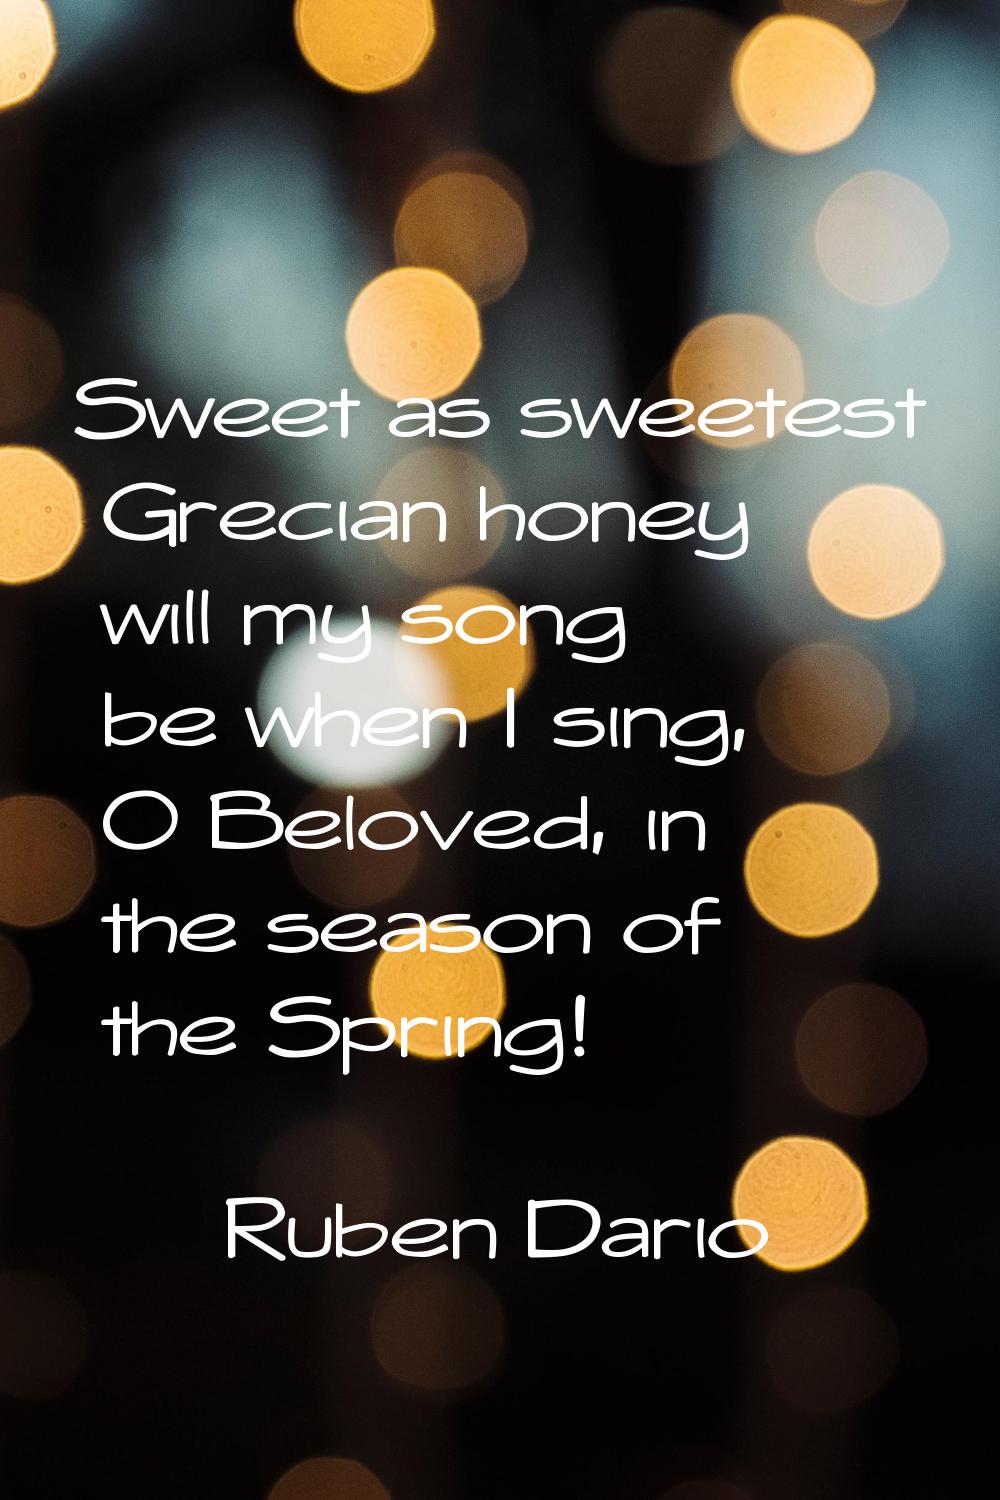 Sweet as sweetest Grecian honey will my song be when I sing, O Beloved, in the season of the Spring